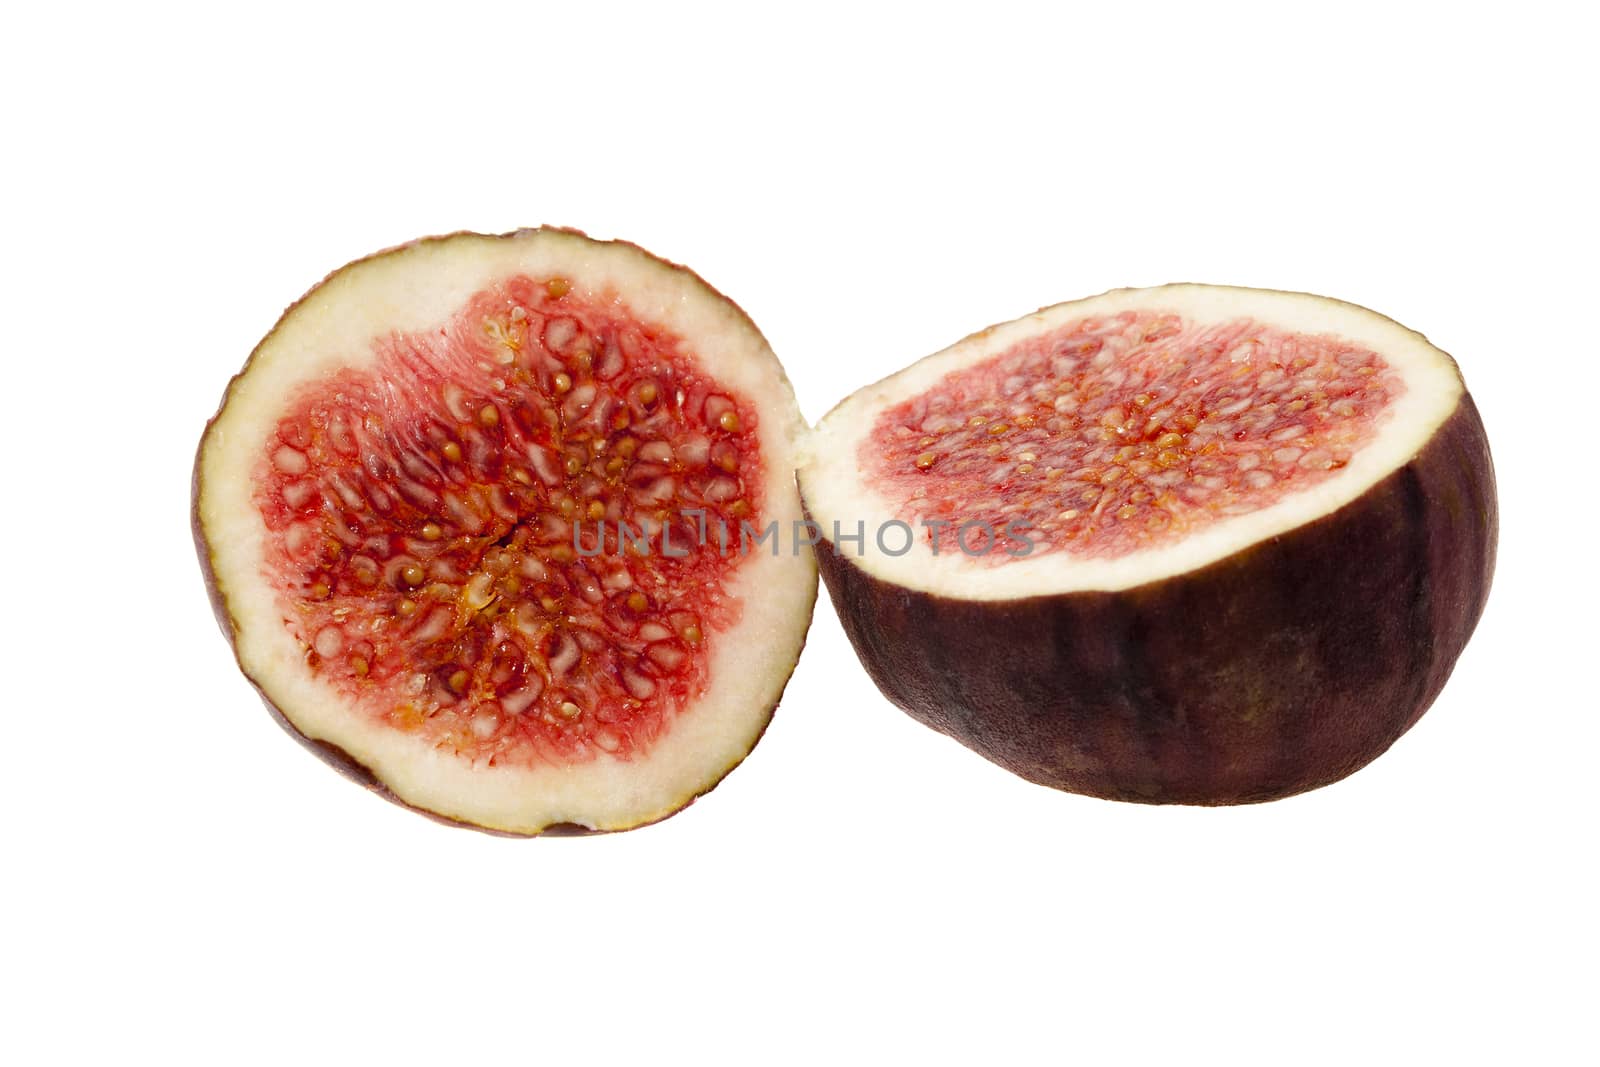 photographed close-up of red ripe fresh figs, cut into two halves